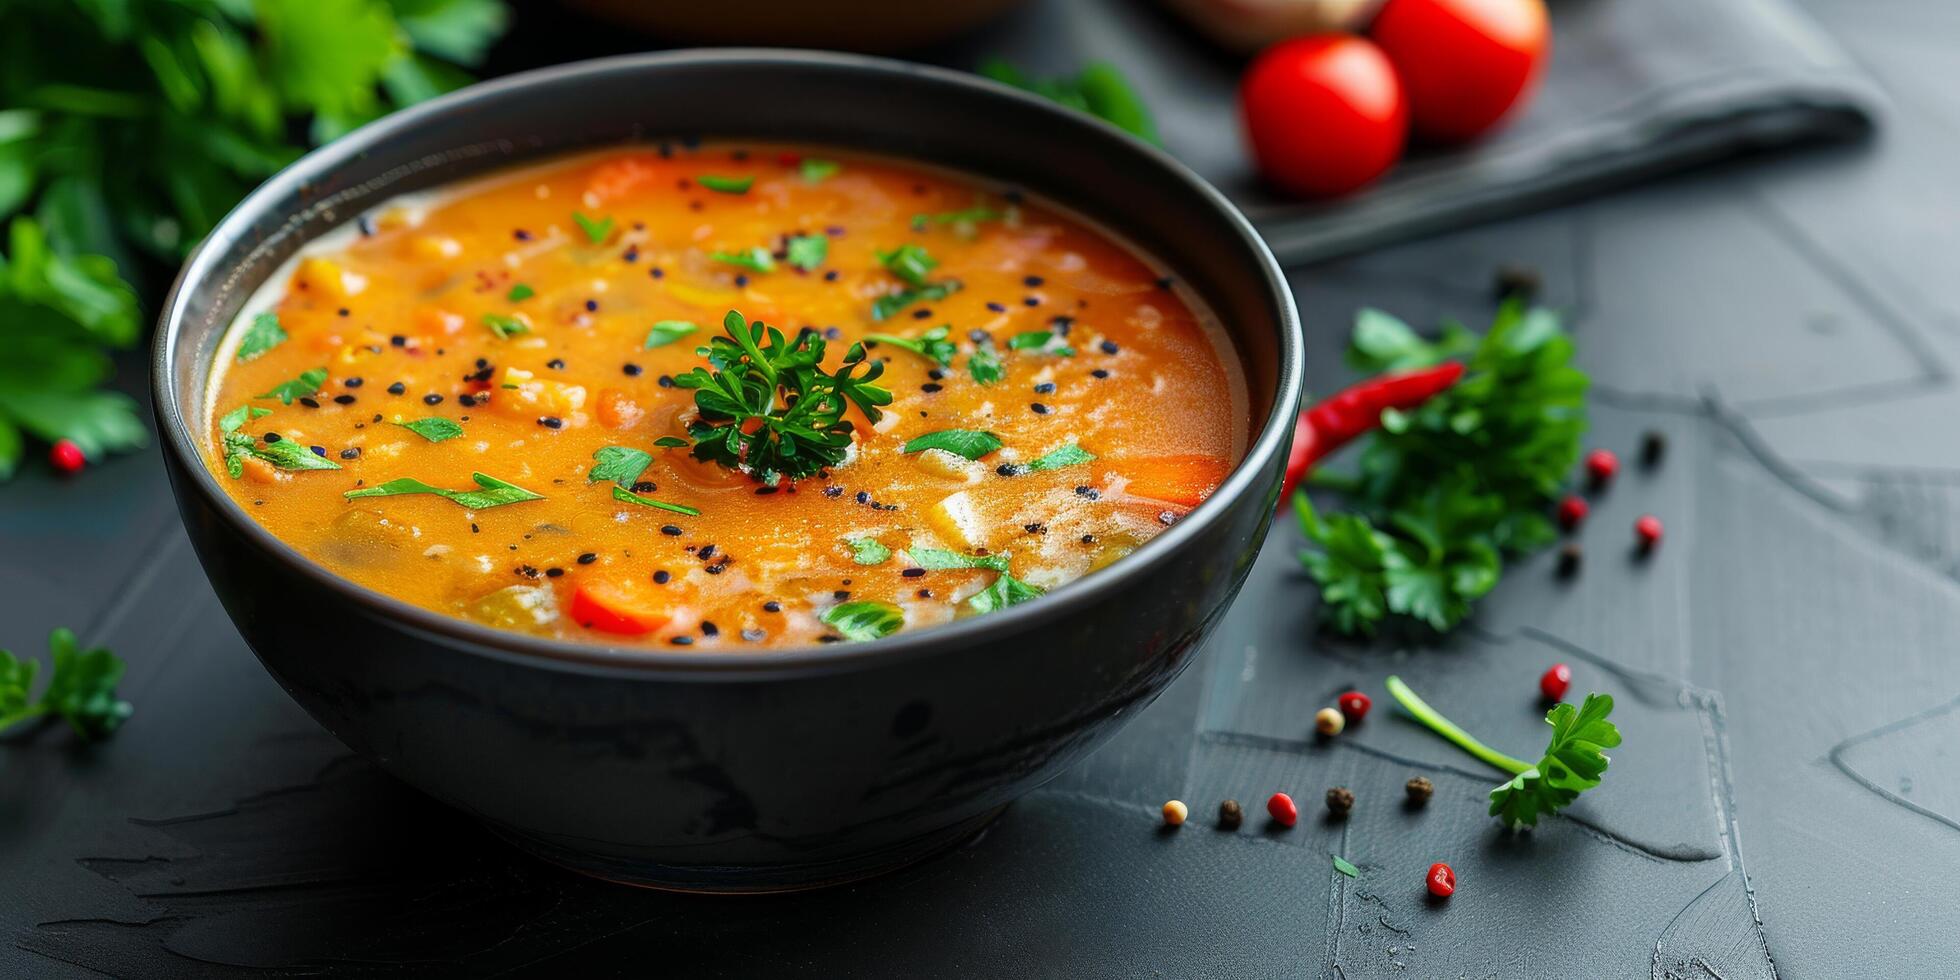 Spicy Pumpkin Soup With Herbs photo